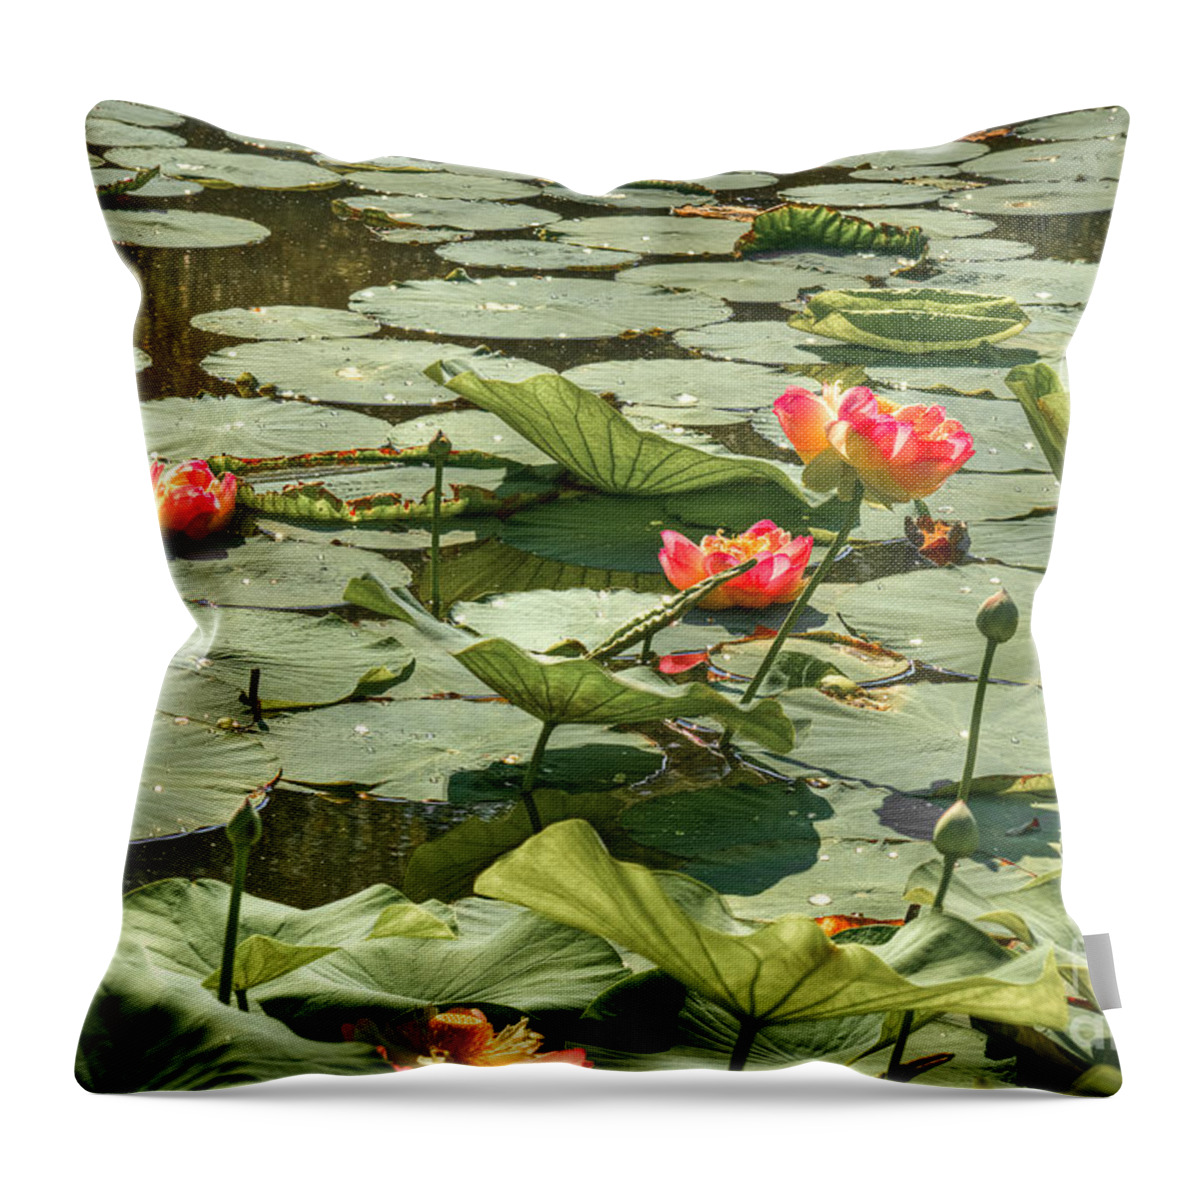 Lotus Flowers Throw Pillow featuring the photograph Glistening Lotus Flowers by Brenda Giasson